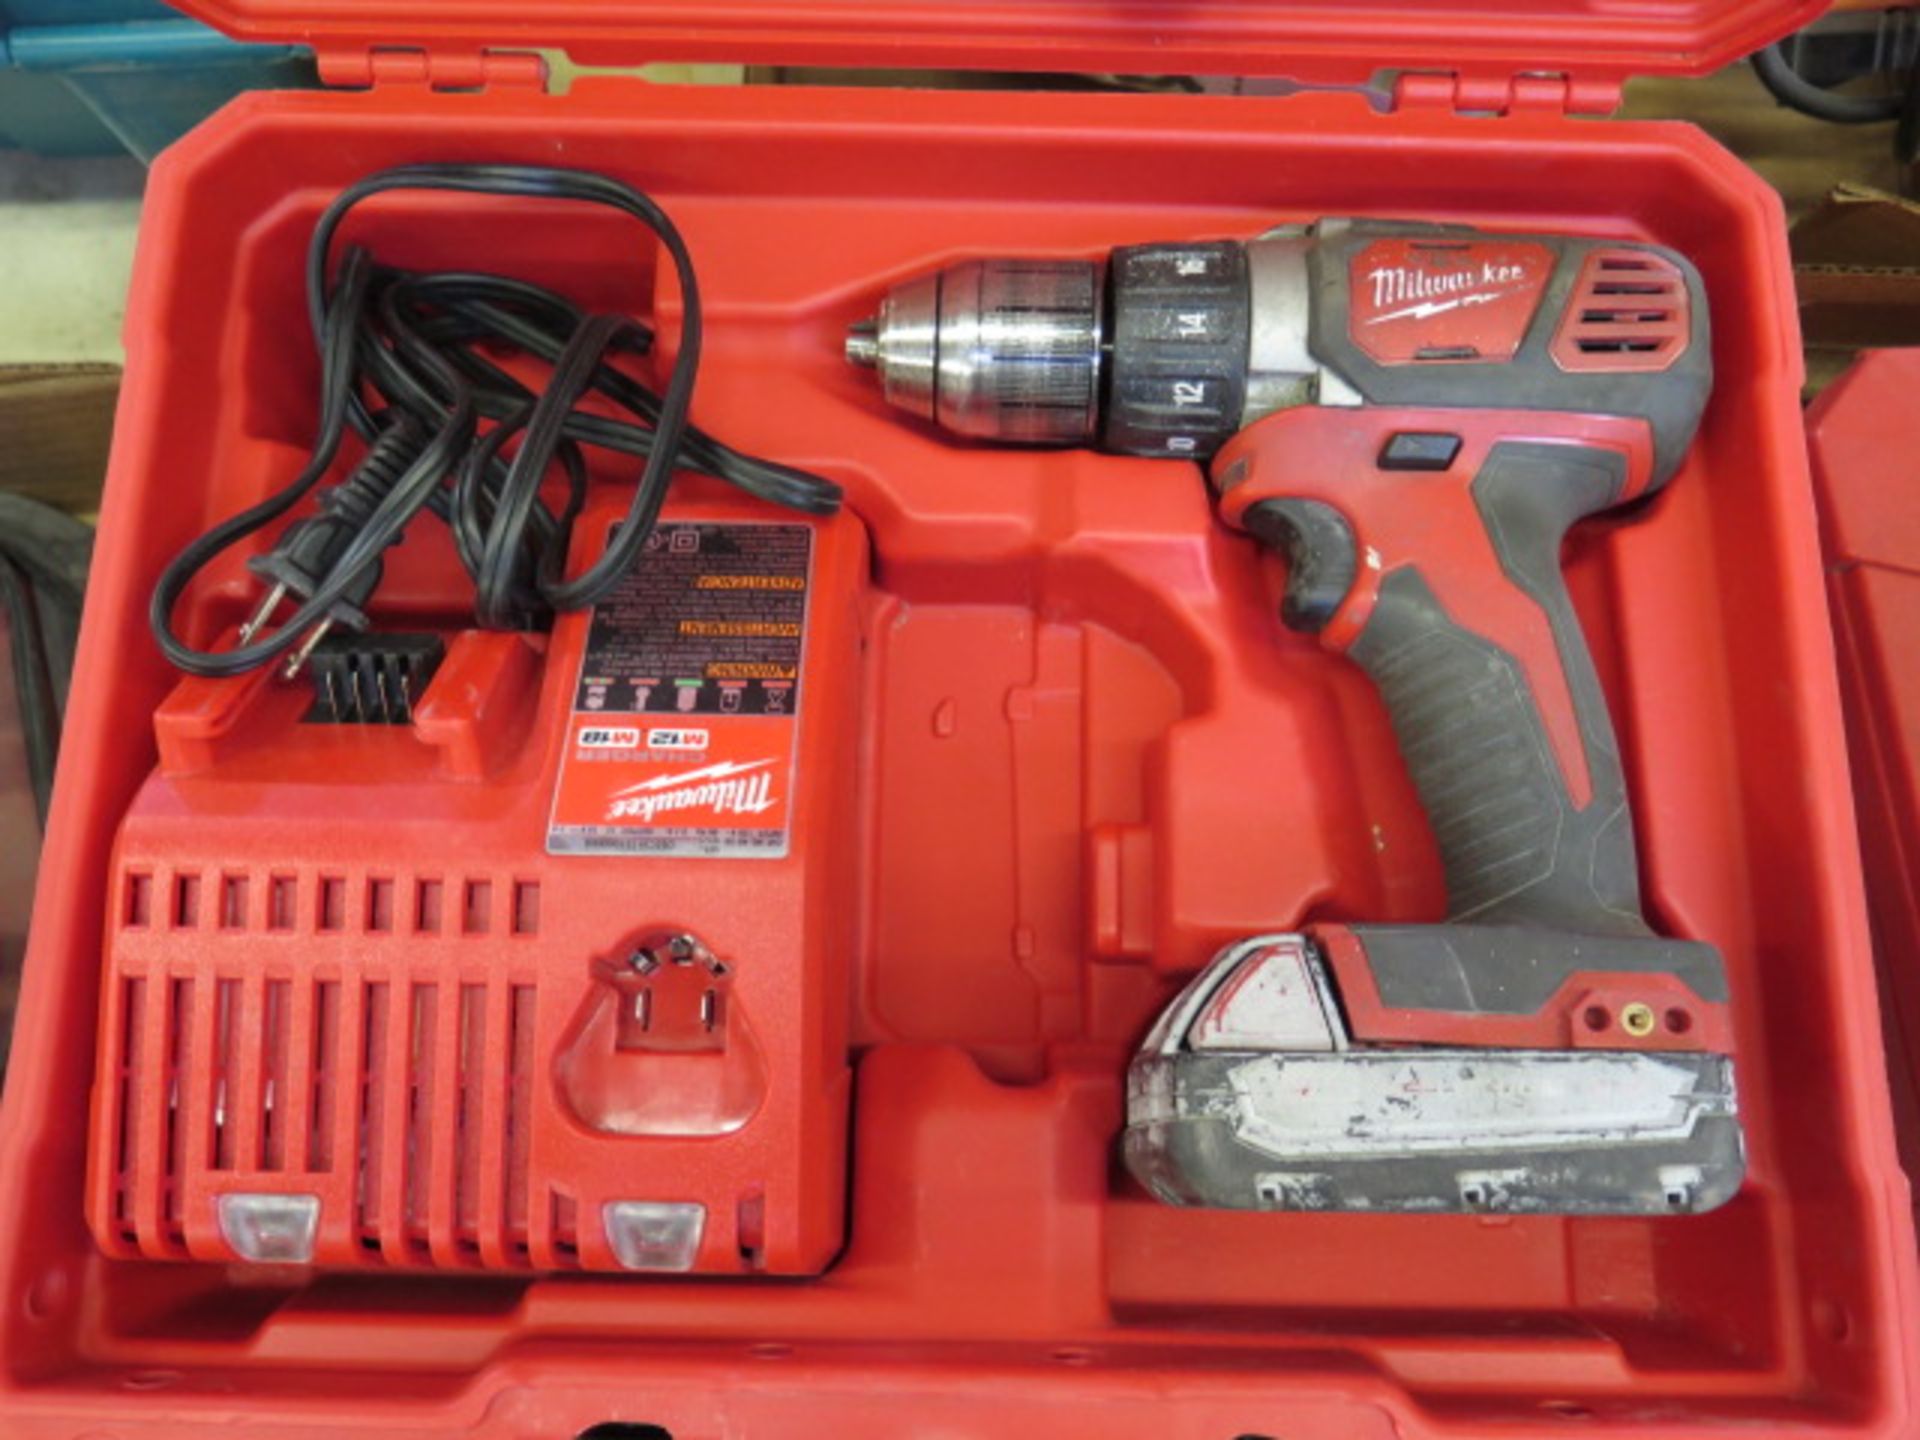 Milwaukee 18Volt Drill Kits (2) w/ Chargers (SOLD AS-IS - NO WARRANTY) - Image 3 of 5